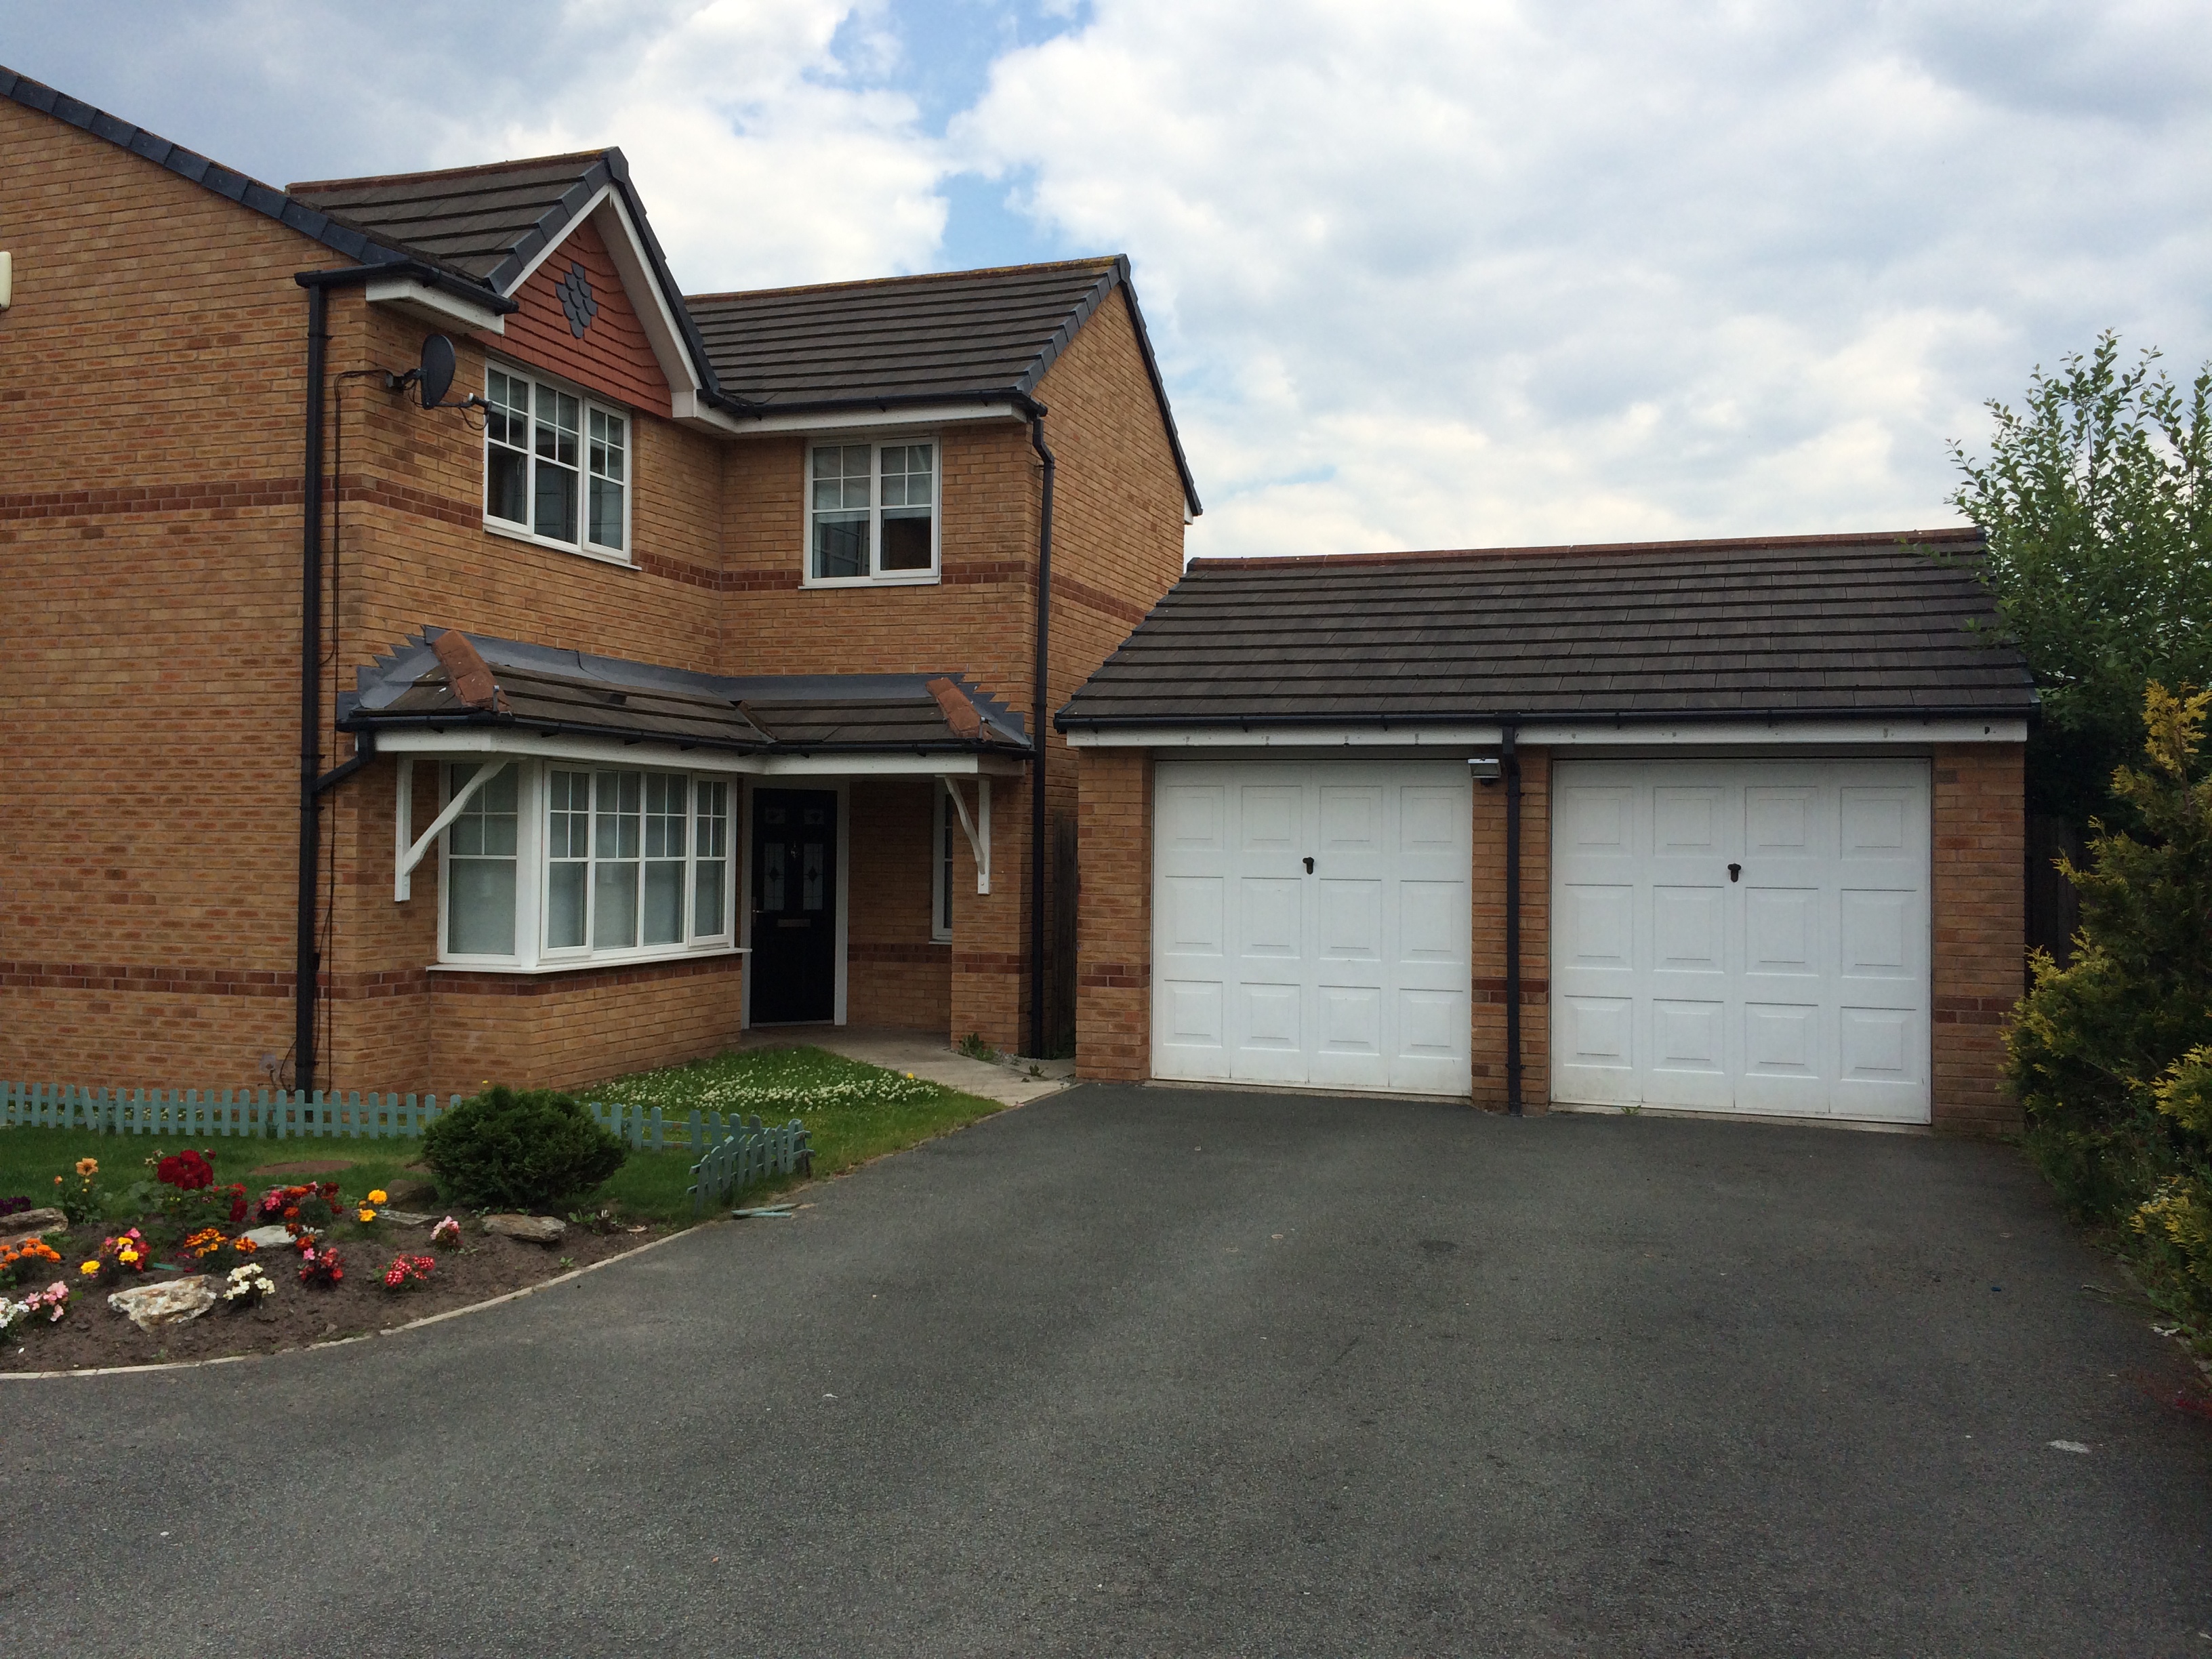 4 bed detached house with 3 lounges double garage L32 